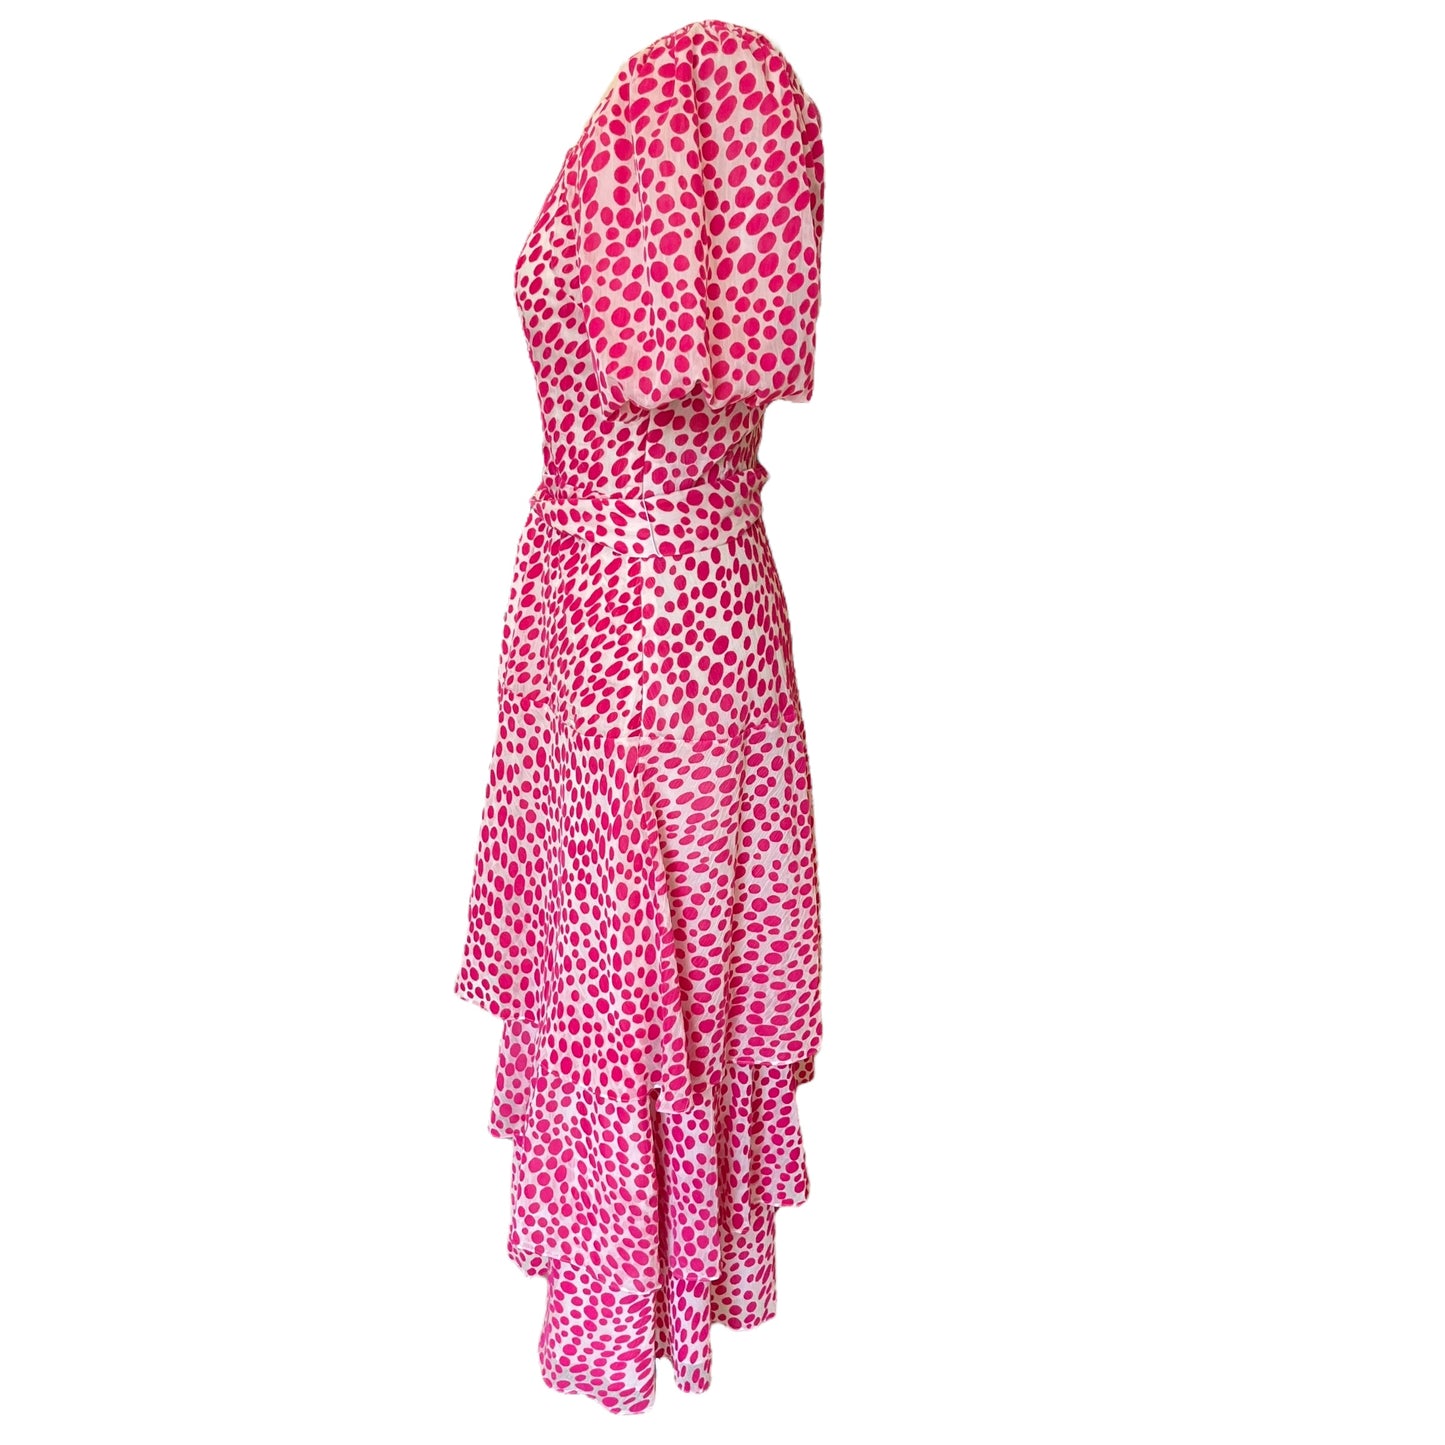 Whistles Pink Spotty Dress - 8 - NEW